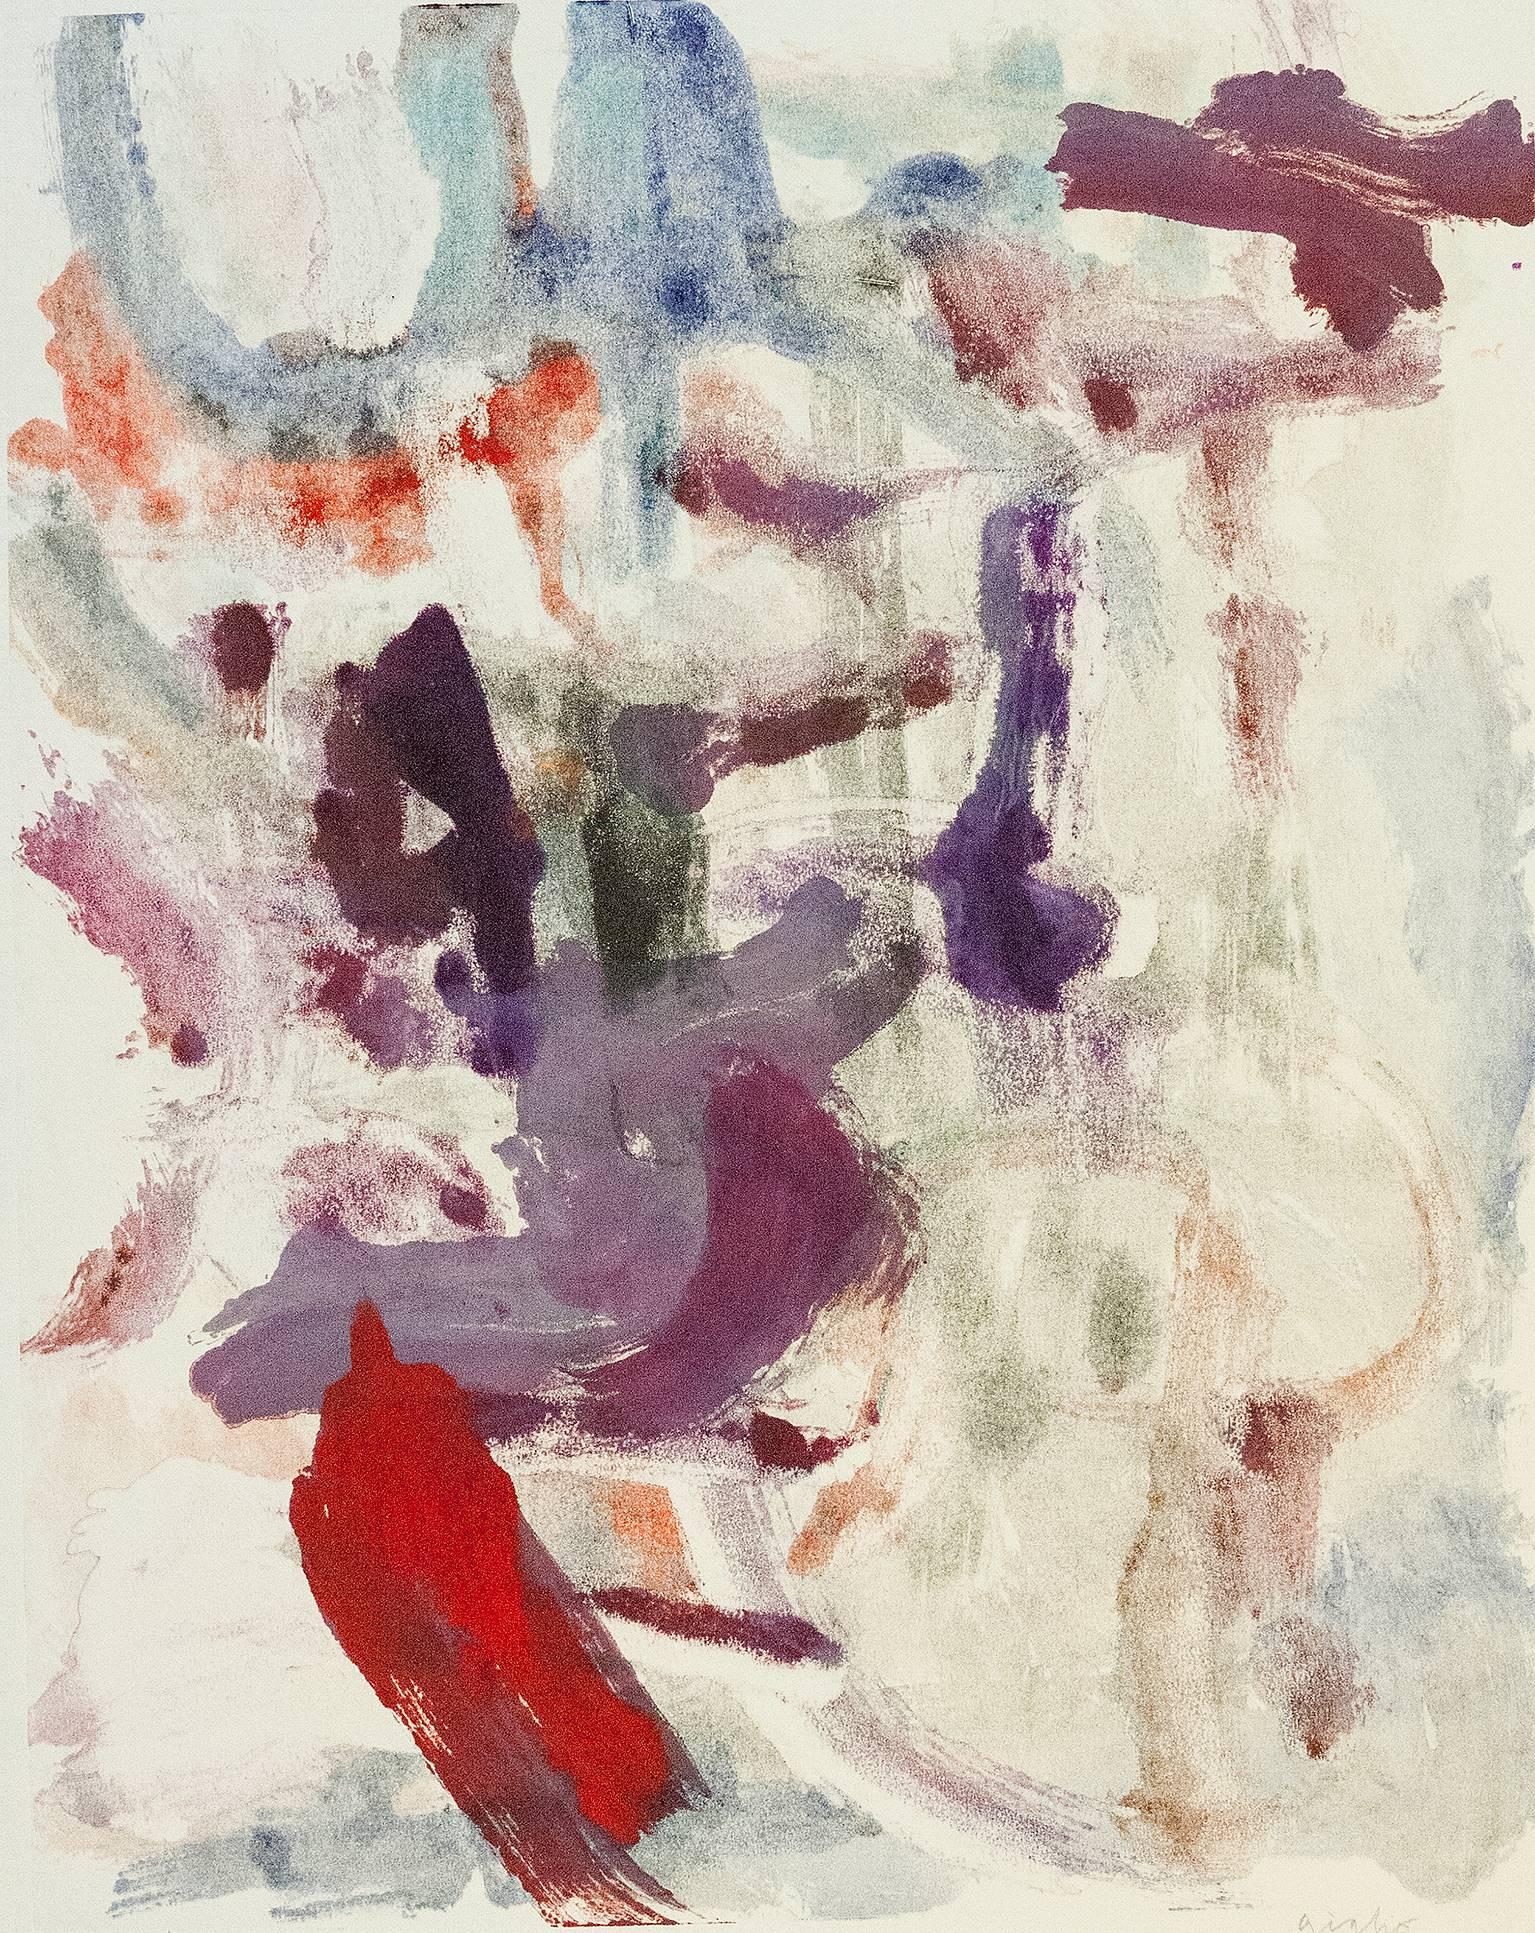 Richard Giglio Abstract Print - "Landscape #29", gestural, abstract, painterly print, red, violet, blue, gray.